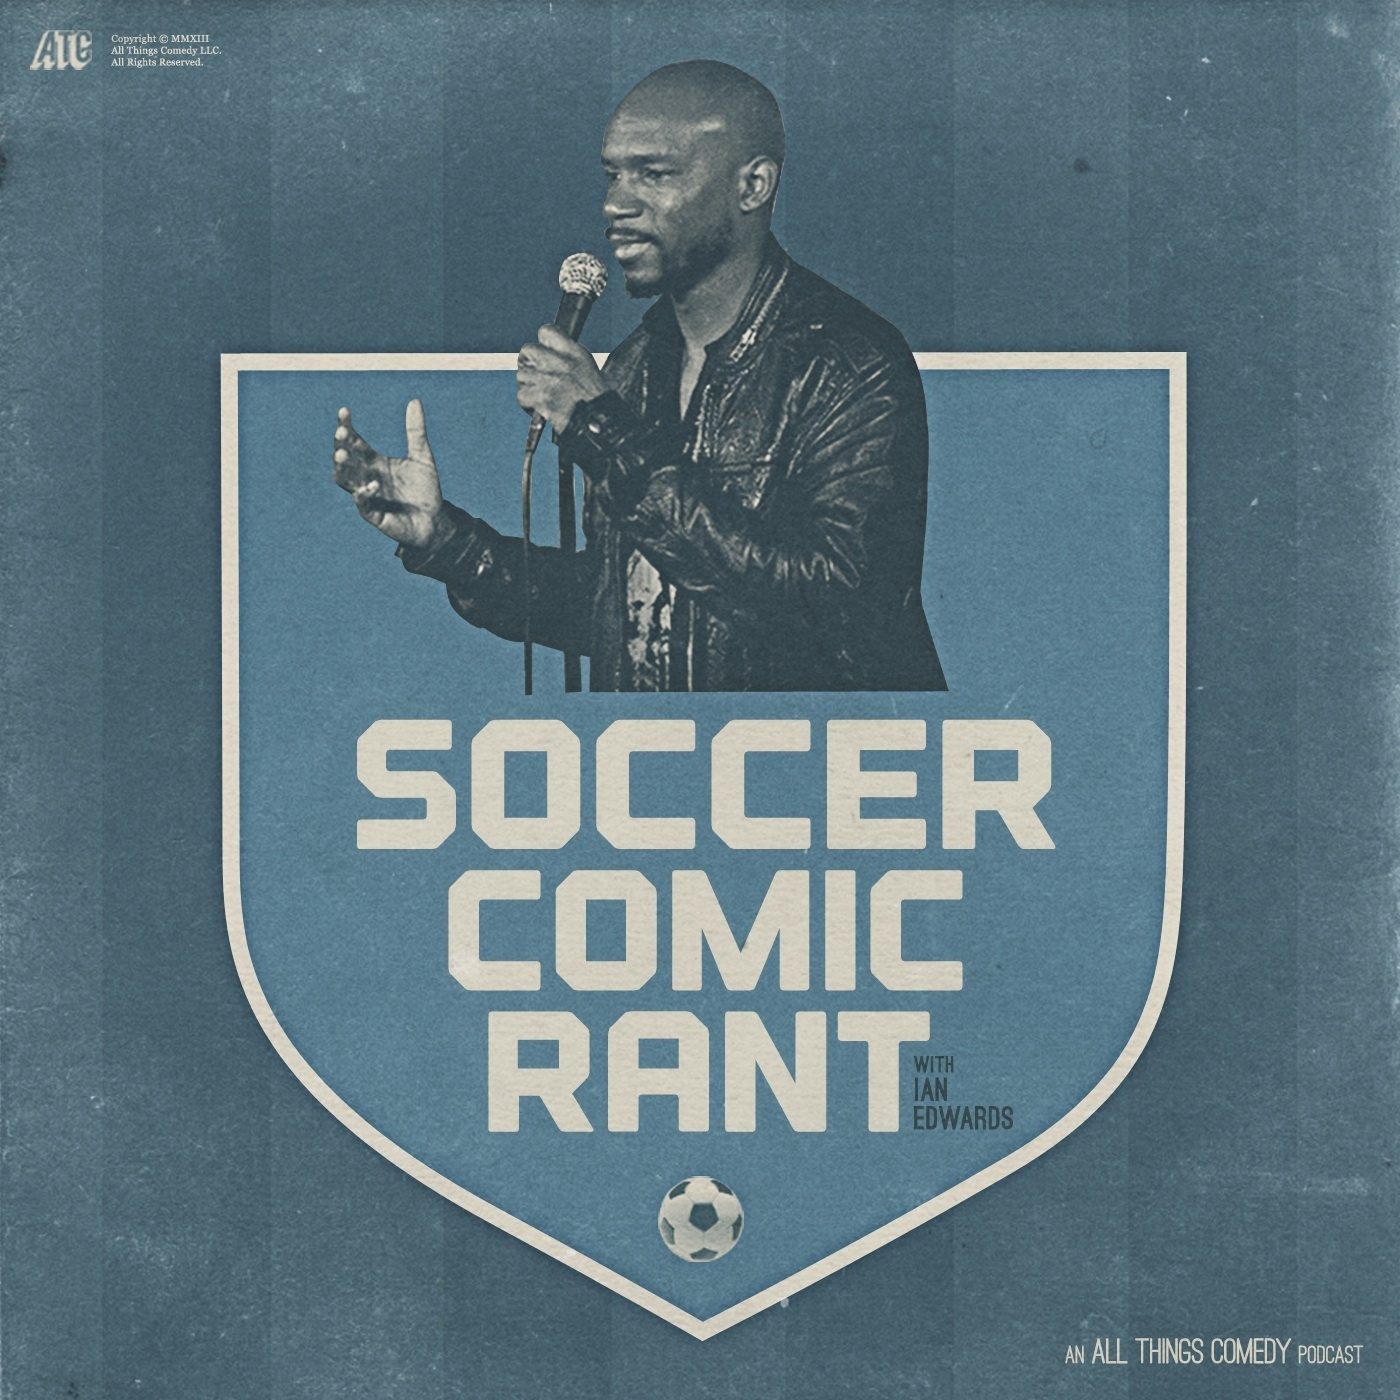 Soccer Comic Rant #331 When Will The Media's Racist Attacks On Manchester United Players Stop? Plus International Week.